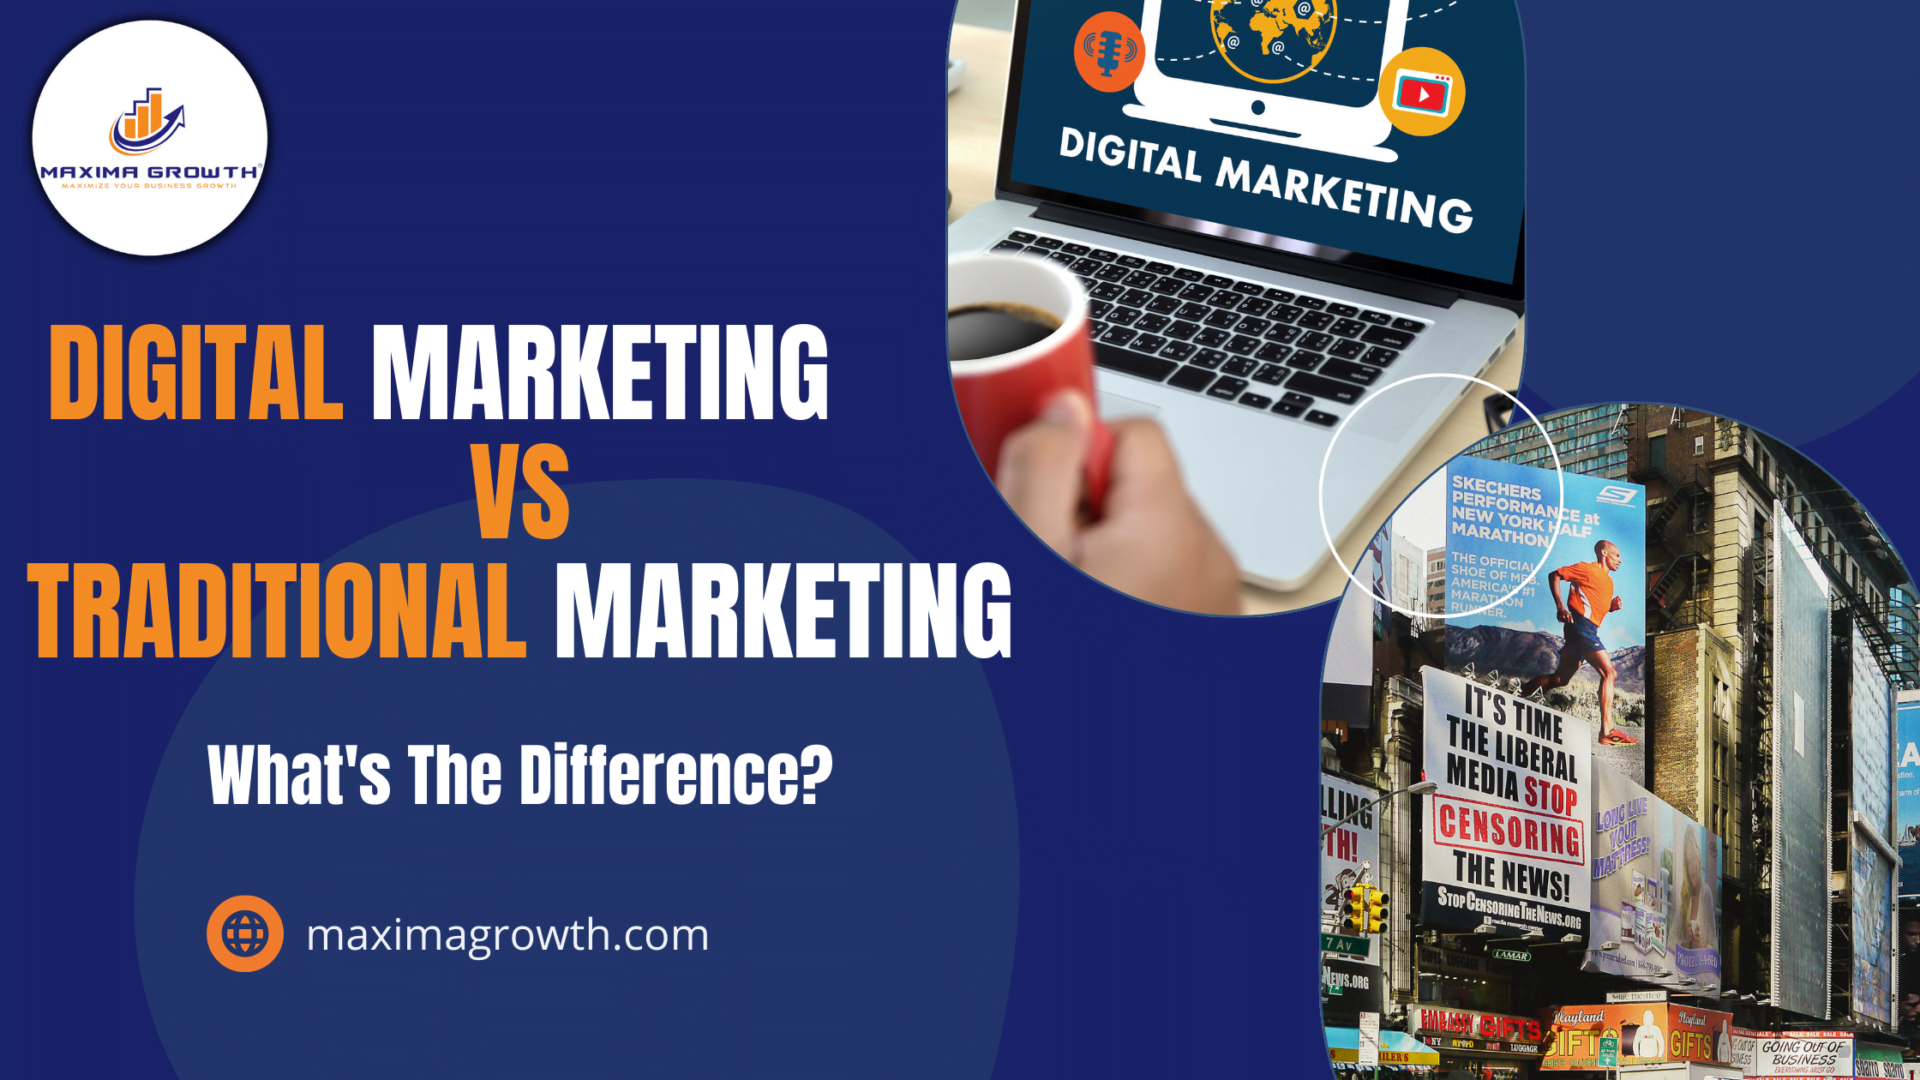 Digital Marketing Vs. Traditional Marketing – What’s The Difference?